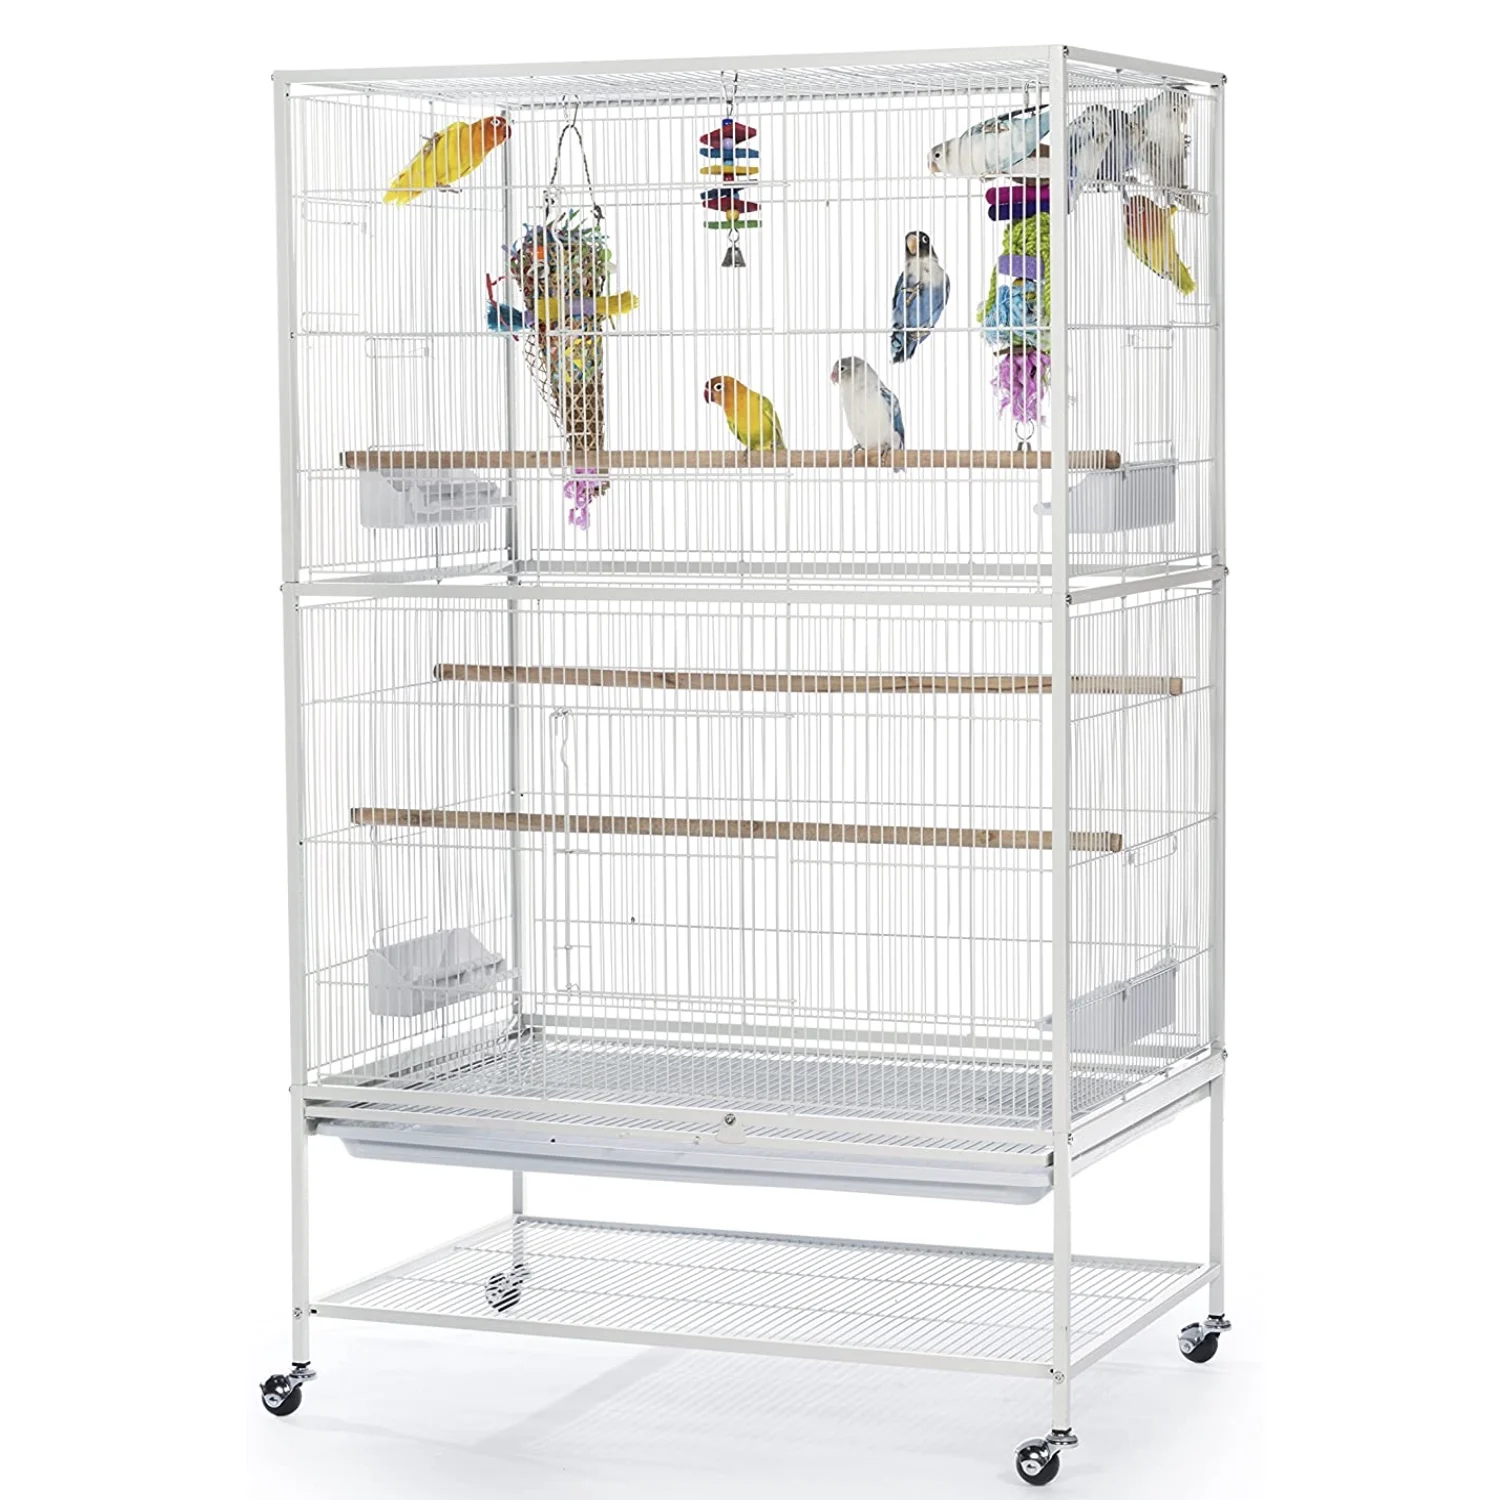 

Best selling wire mesh cage door for pigeon parrots wholesale bird cages for cheap, Black